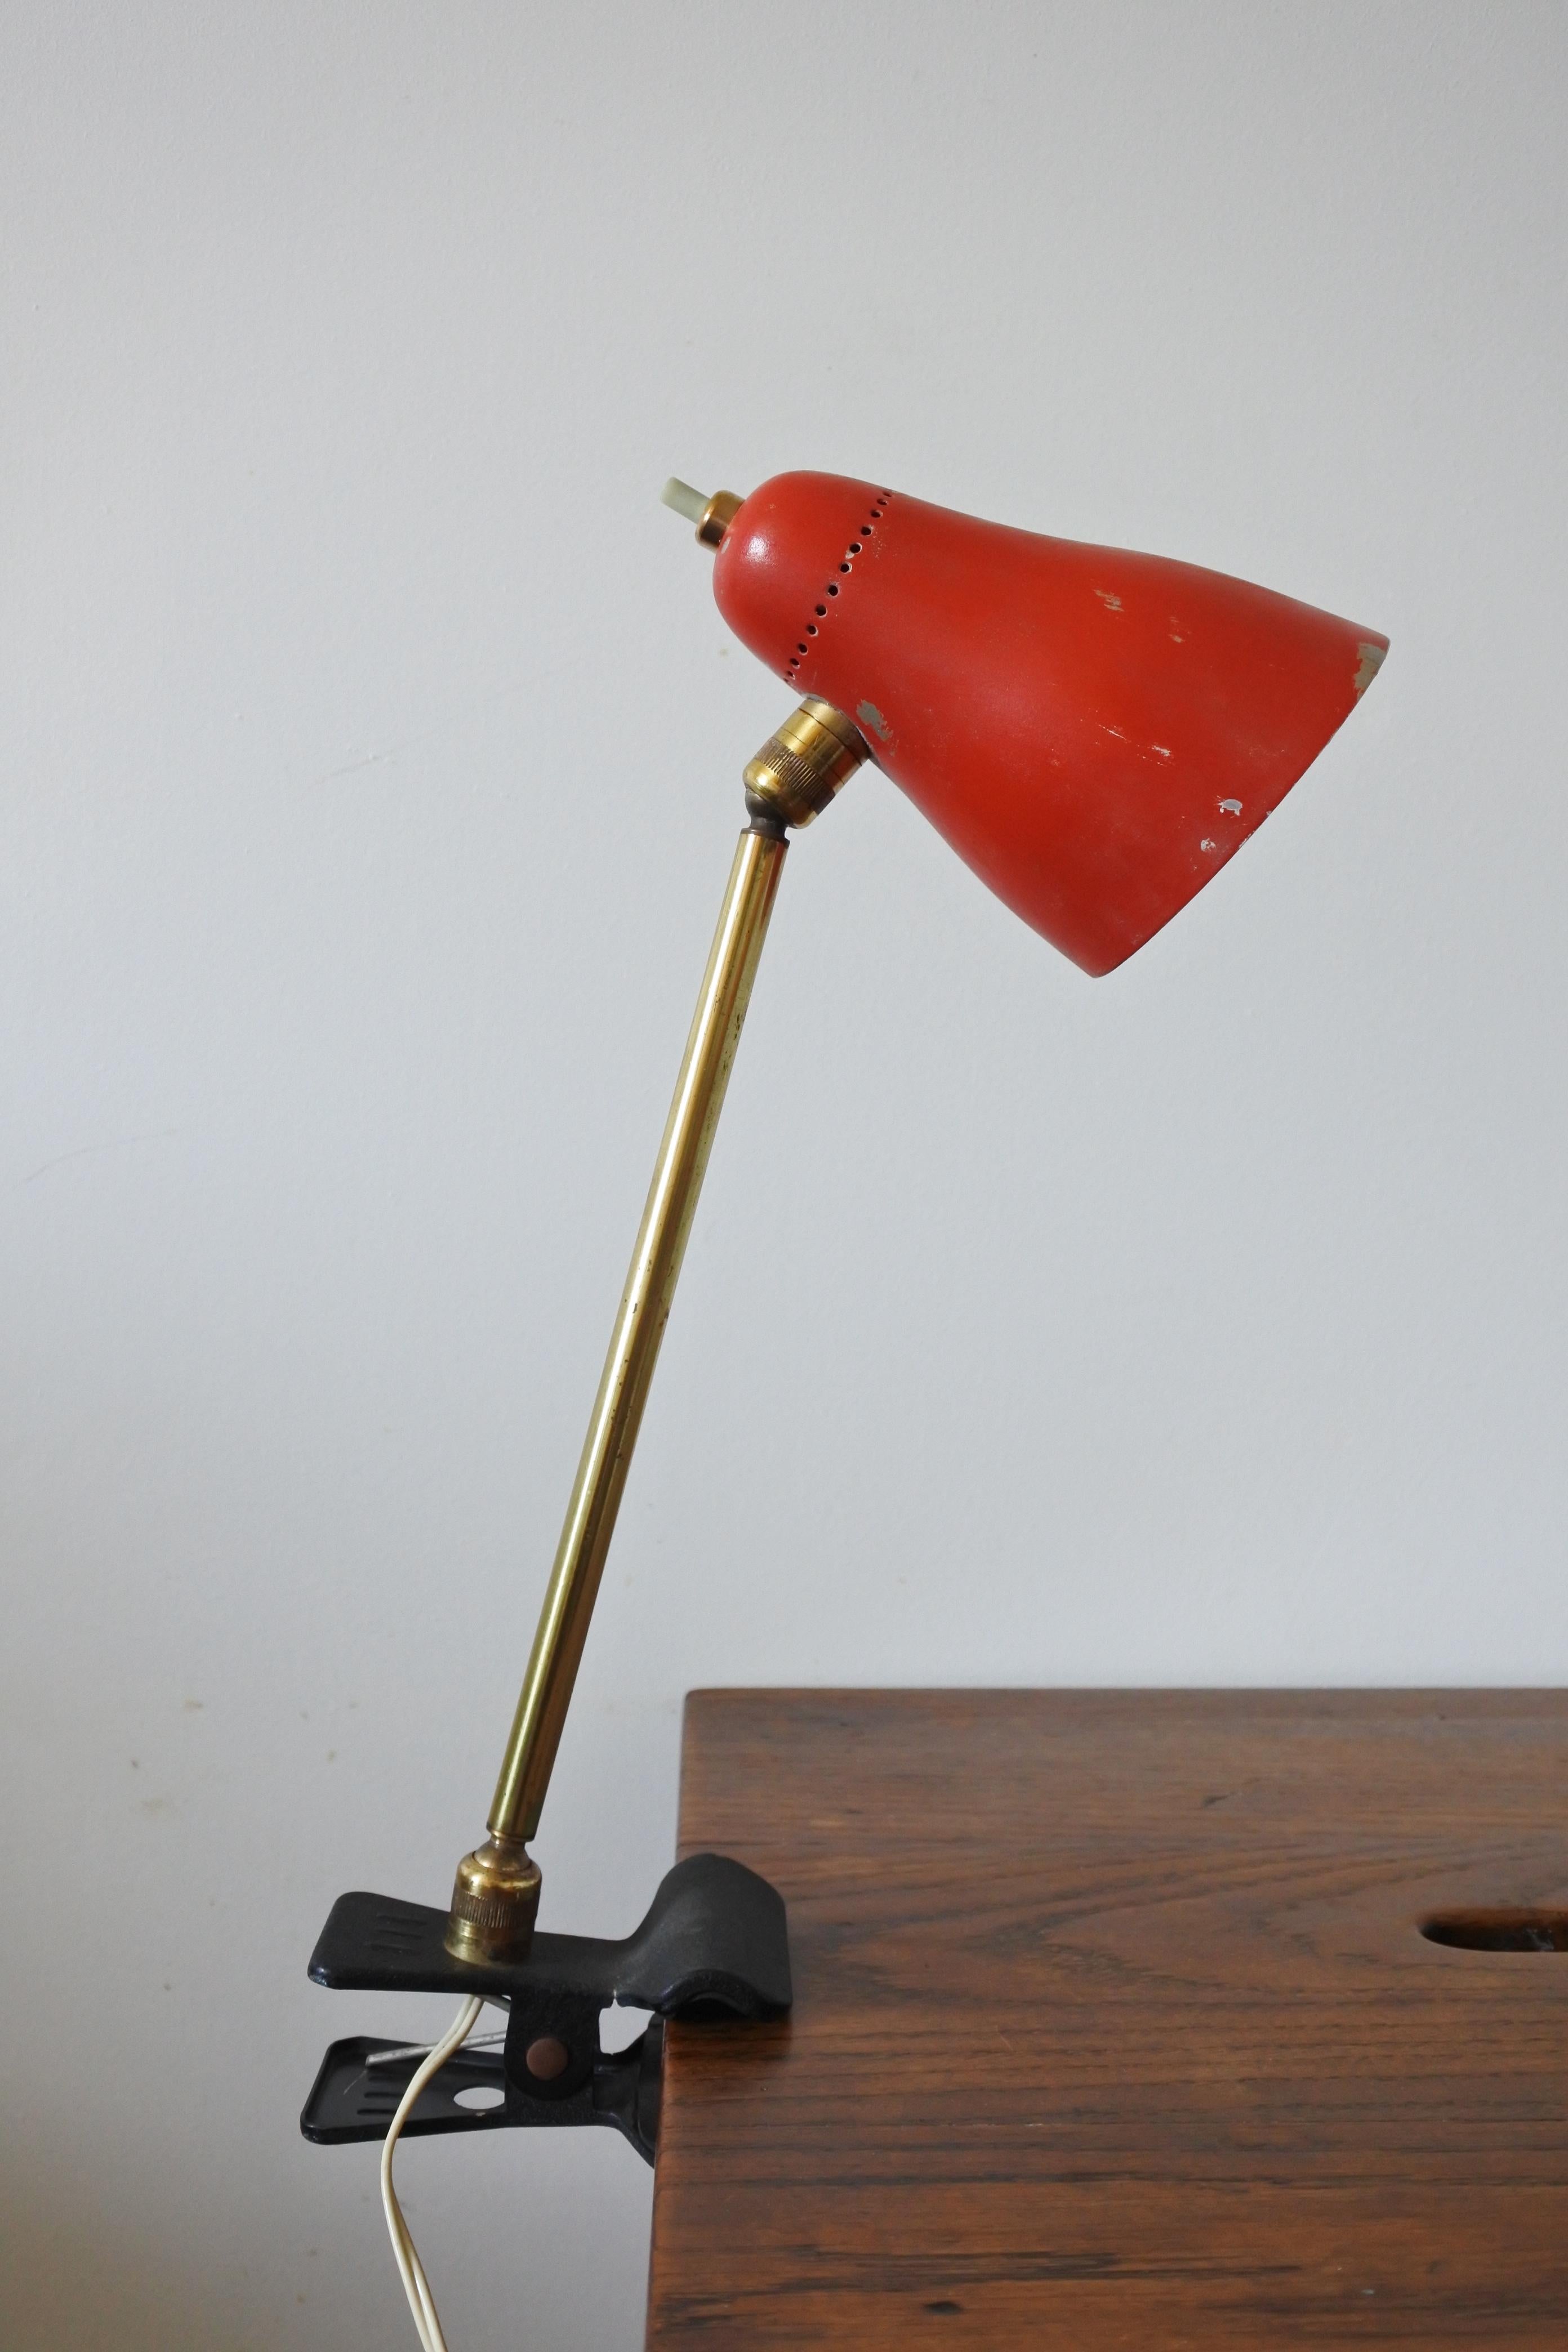 Mid-Century Modern desk clamp lamp 
Italy 1950s
Brass, lacquered metal and lacquered aluminum

Full original condition

Original electrical system. To be safe, the lamp should be checked locally by a specialist to fully comply with local